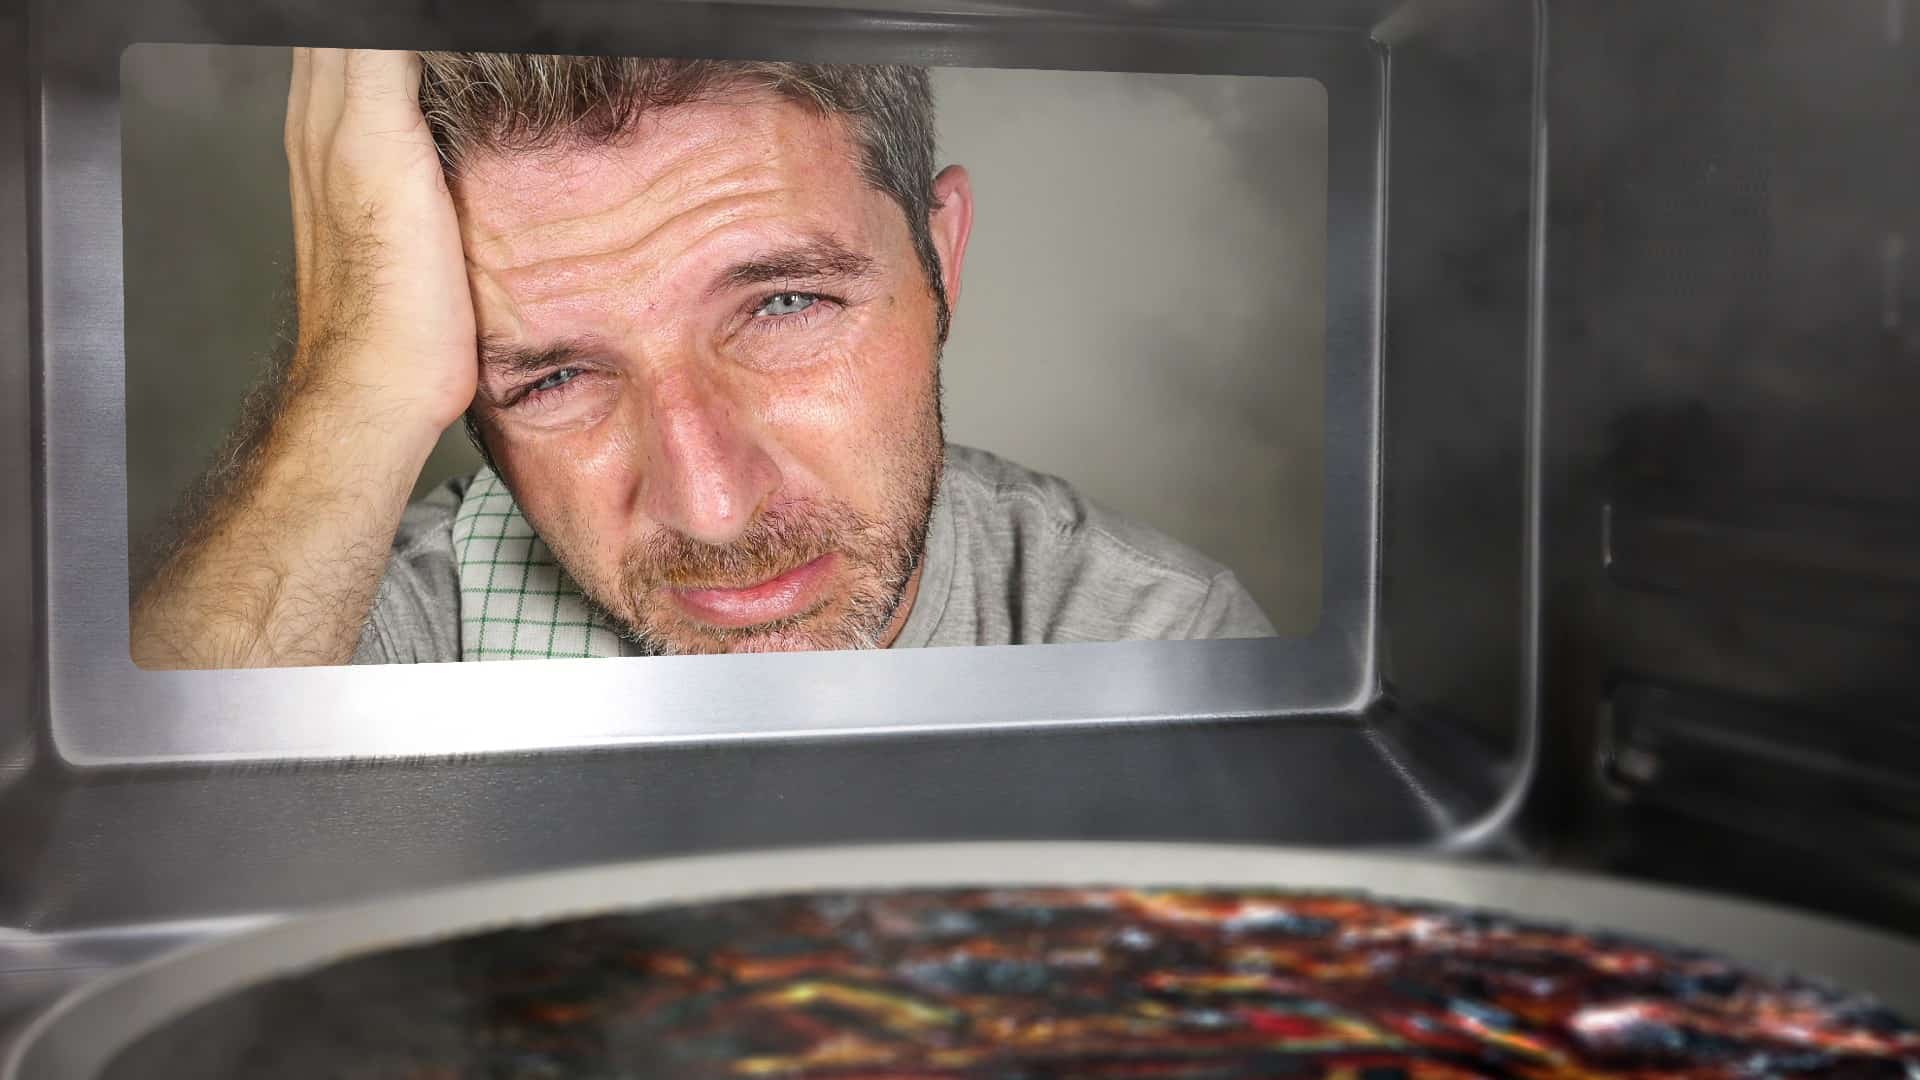 Unhappy man looks into oven at burnt pizza.